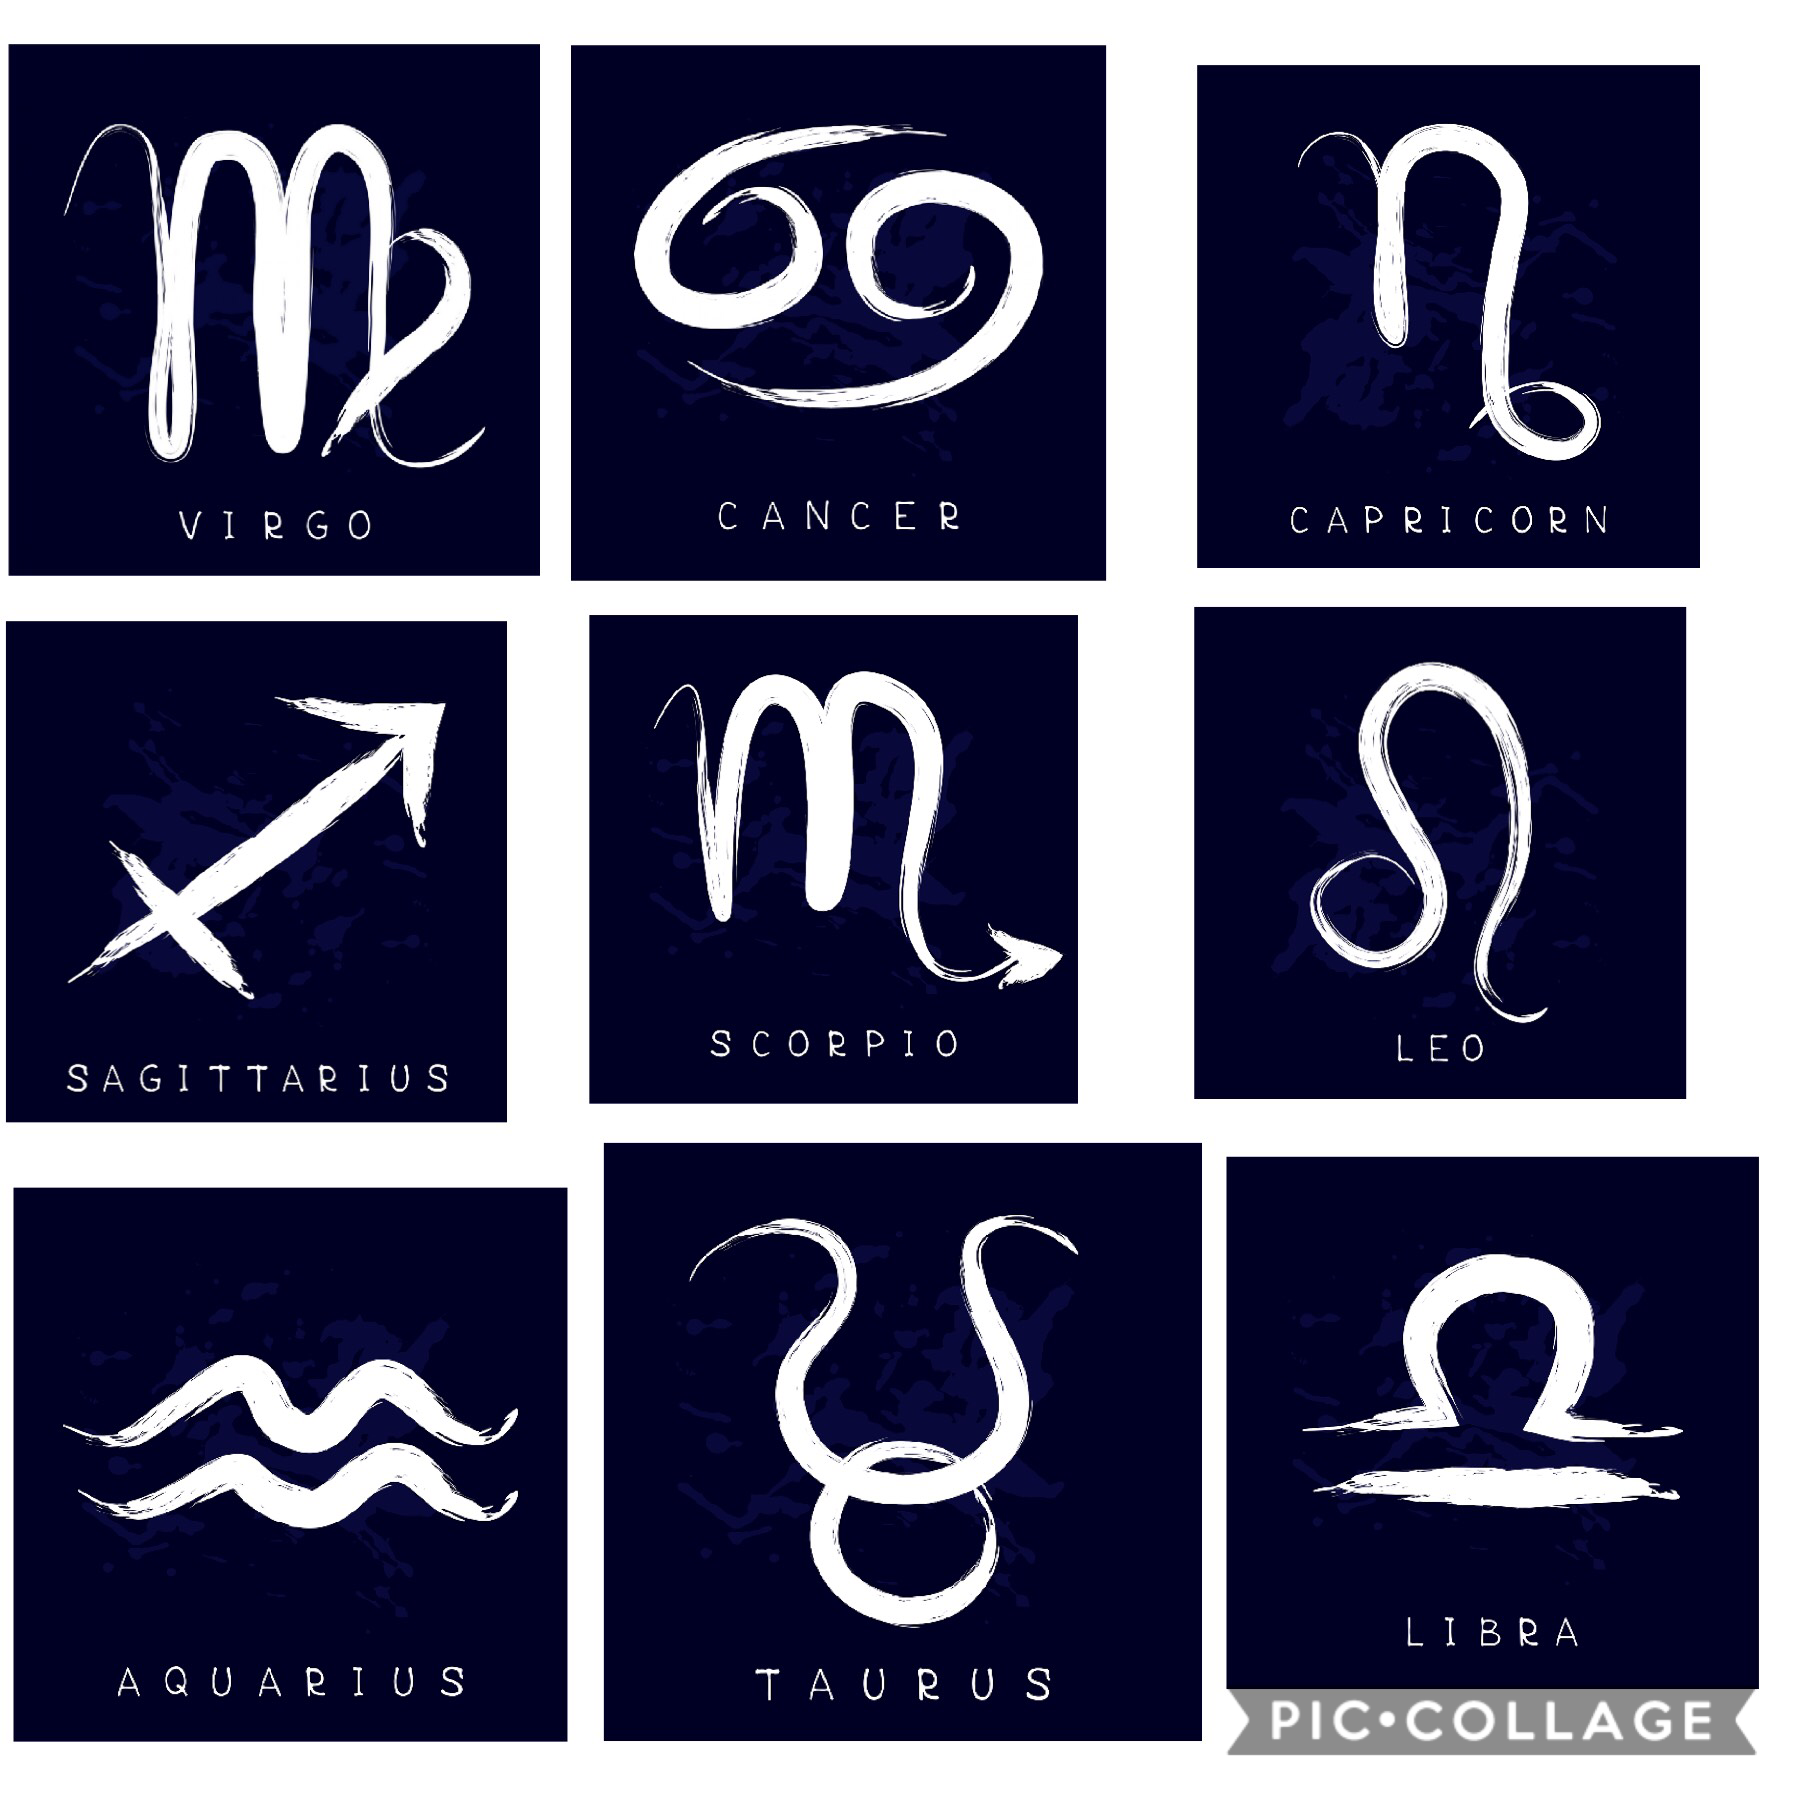 What’s your zodiac sign